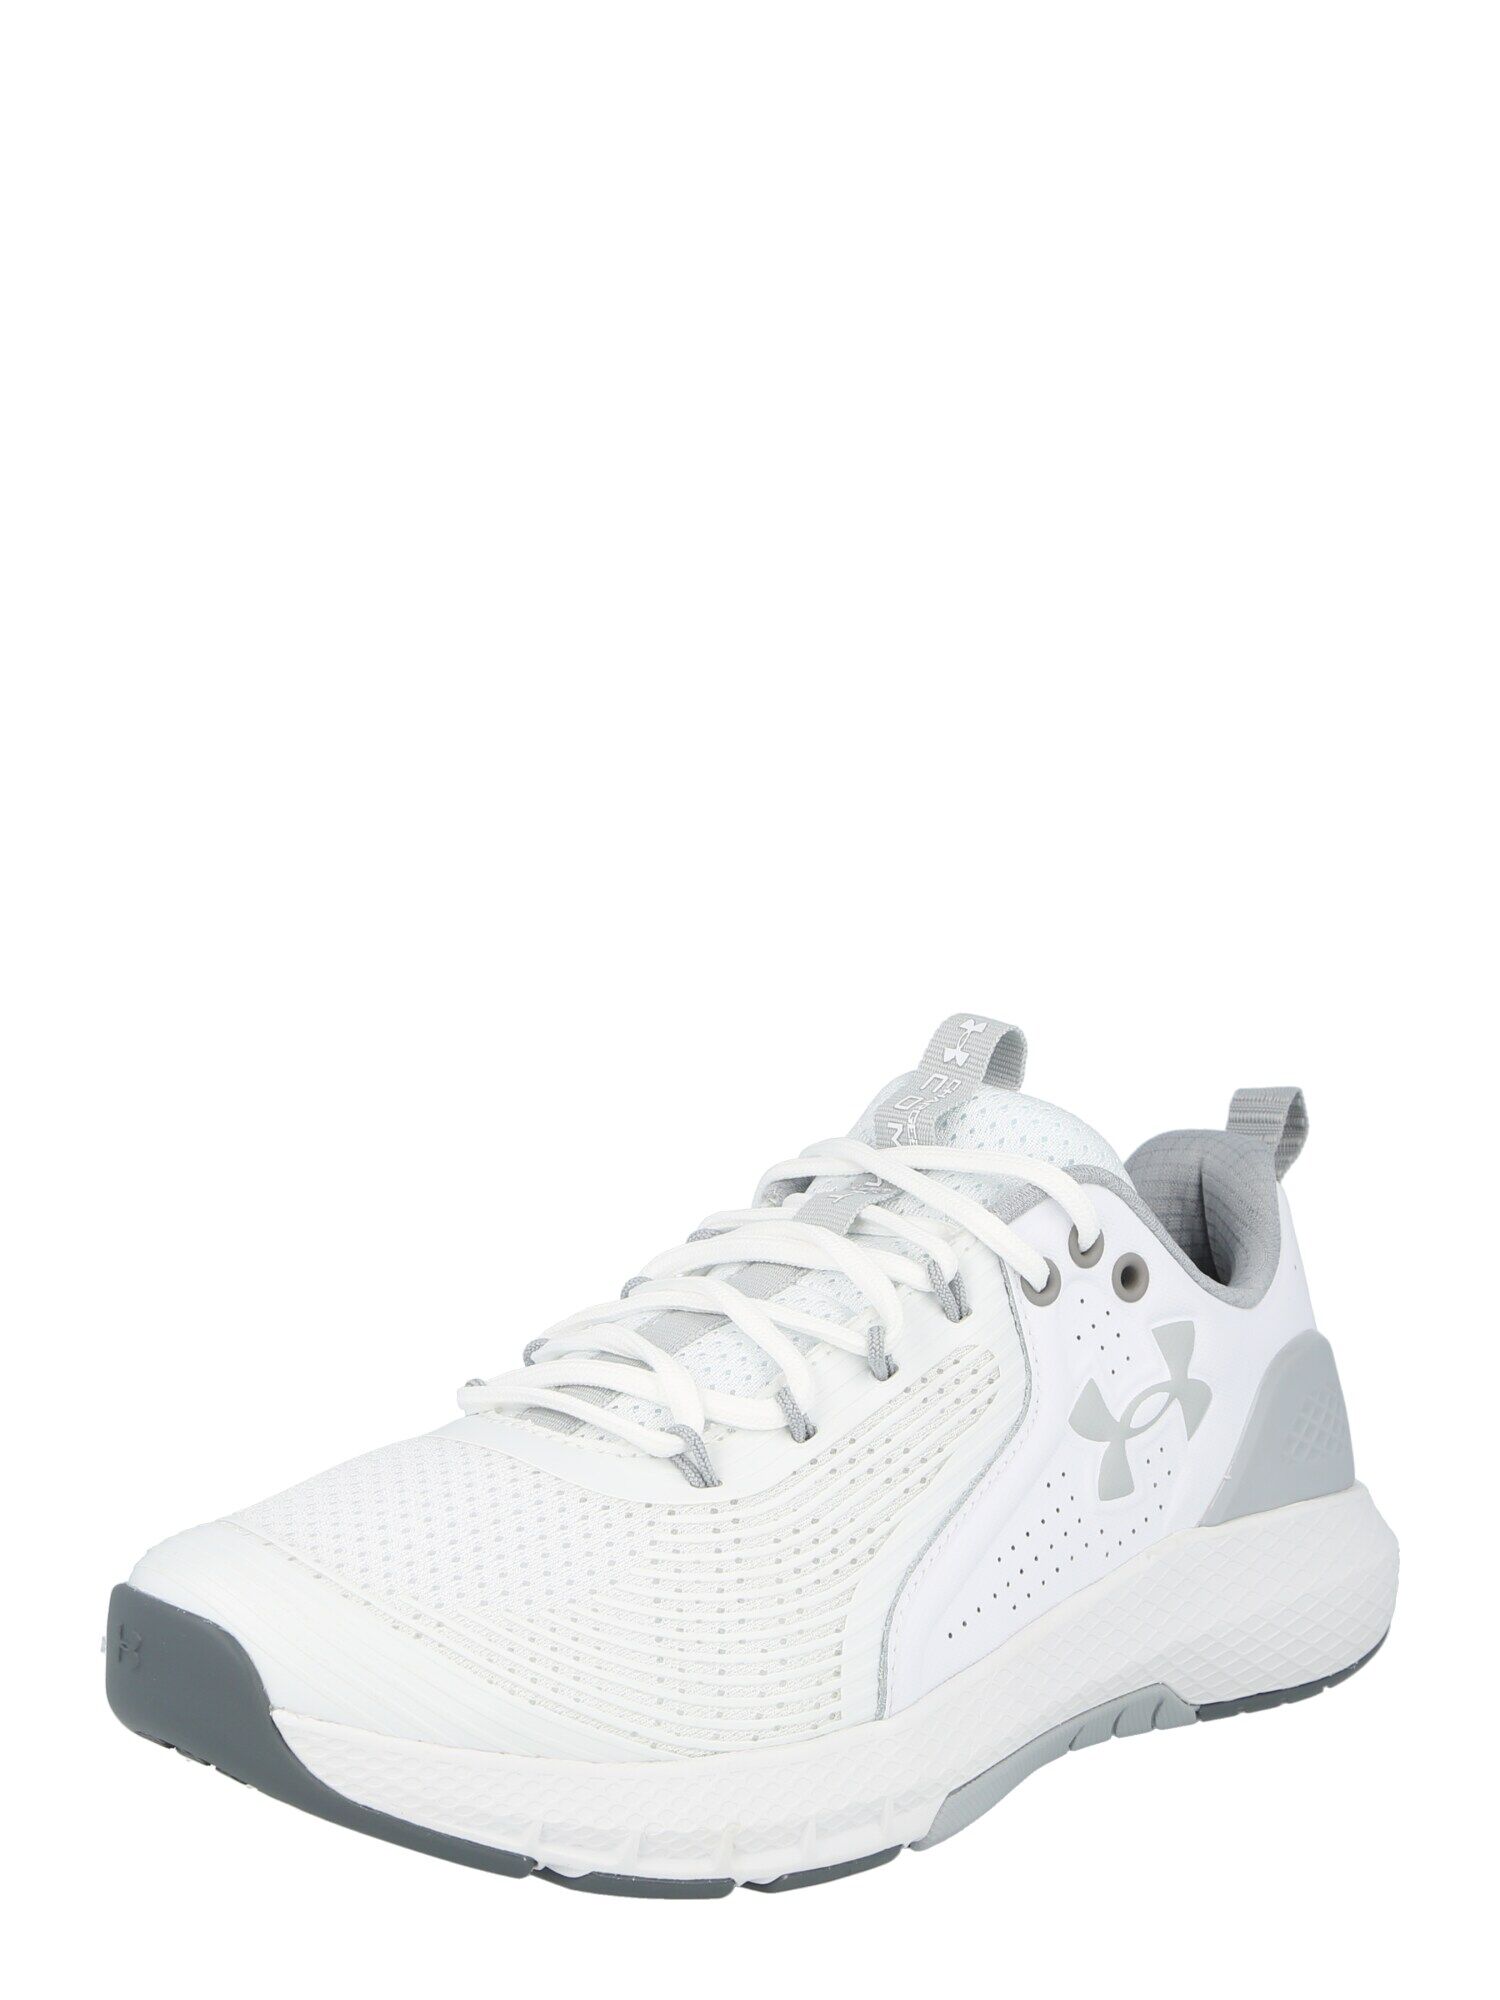 UNDER ARMOUR Scarpa sportiva 'Charged Commit 3' Bianco